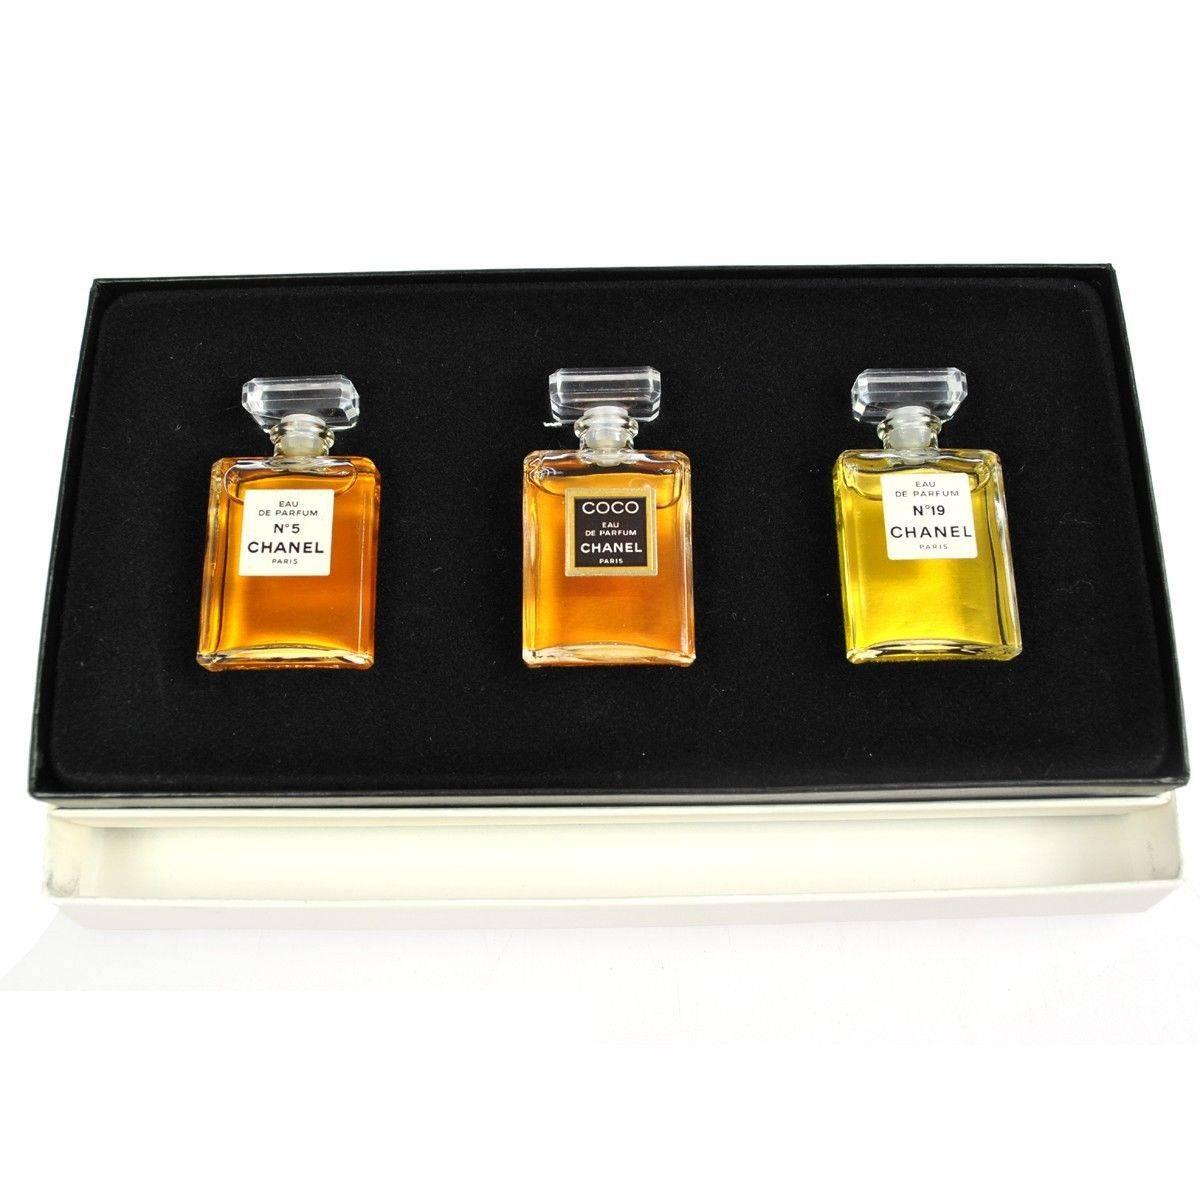 For the bonafide Chanel collector: Chanel Vintage Rare Three Piece No 5 No 19 CoCo Eau de Perfume Bottles Gift Set in Box

Includes set of three bottles
Bottles measure 1